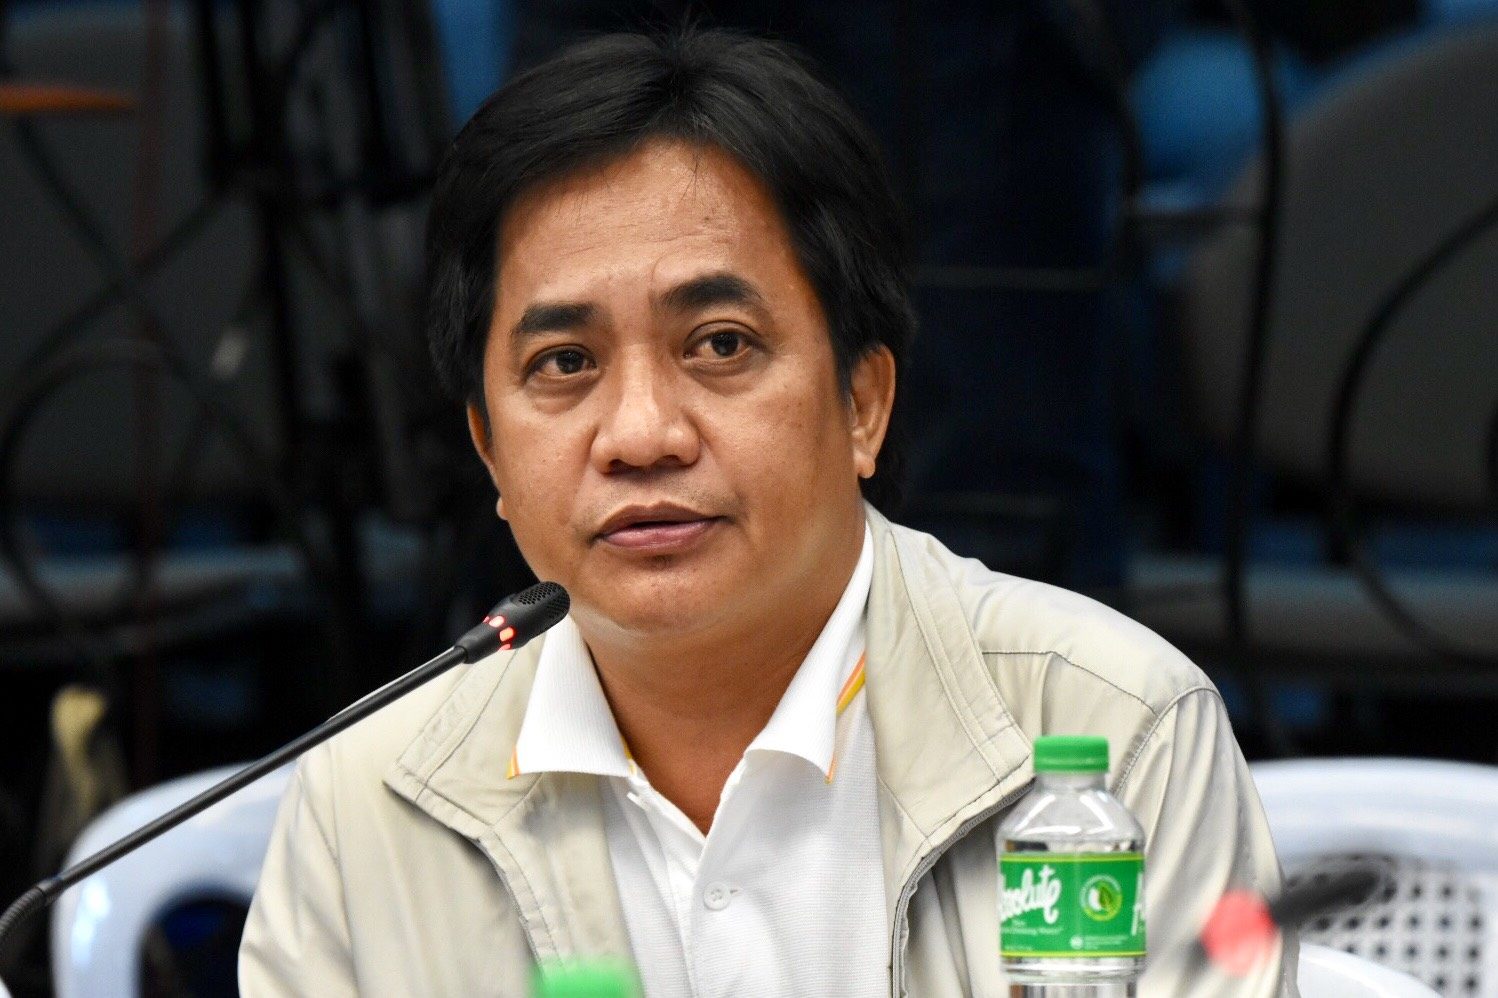 After 7 weeks in Senate, Jimmy Guban to be turned over to DOJ